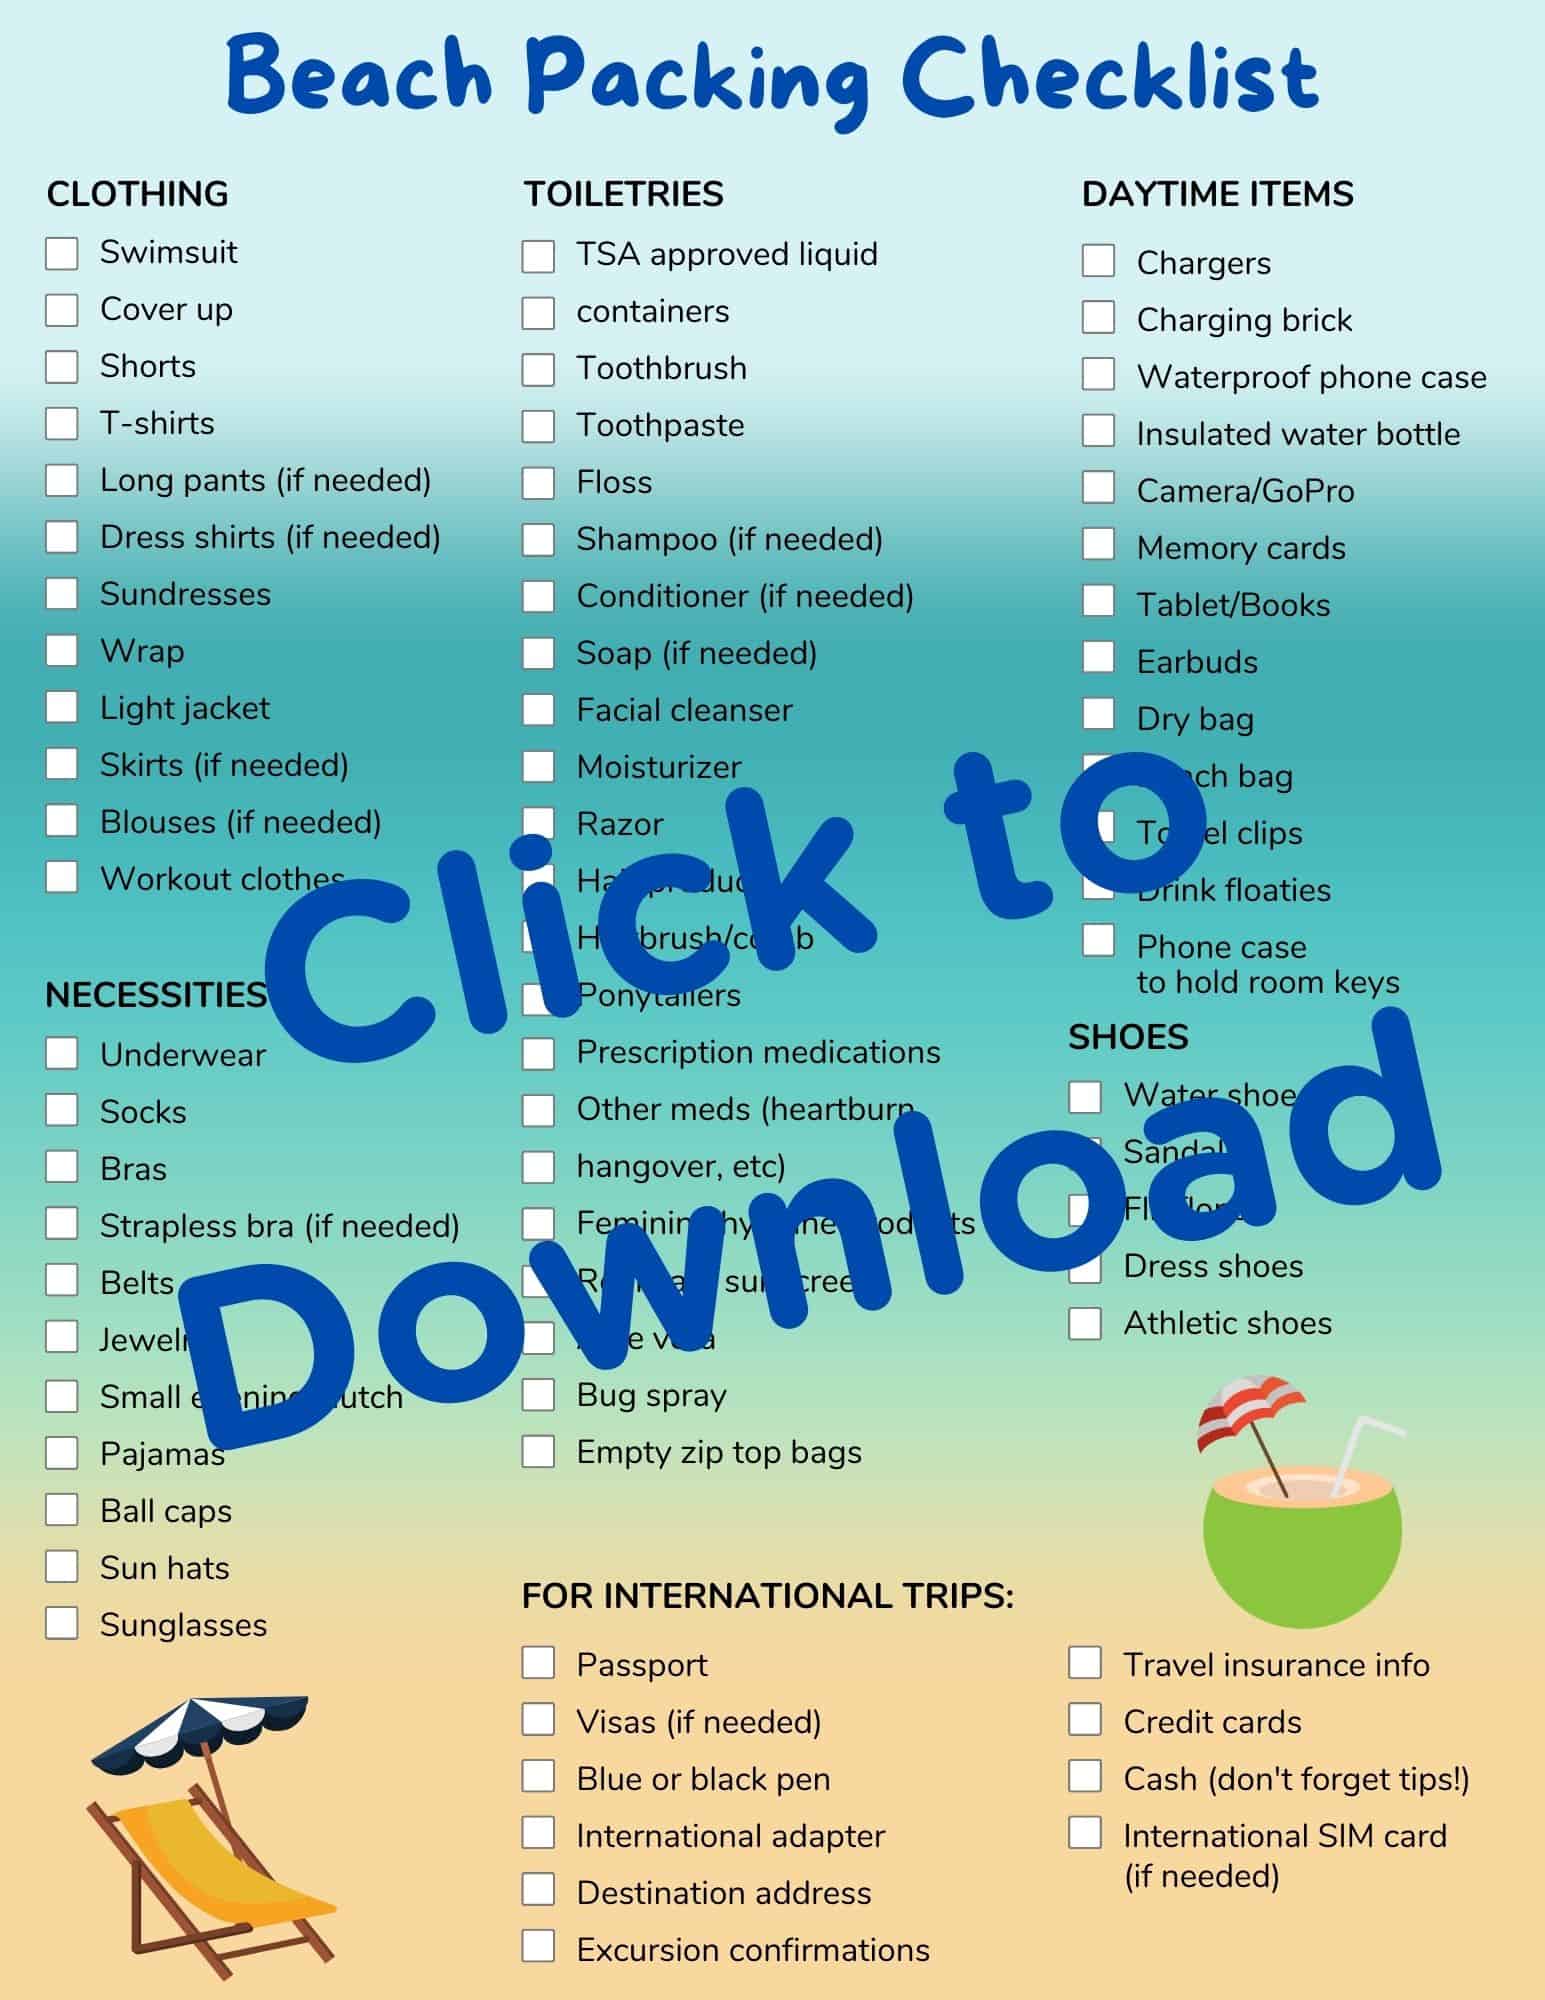 Printable of Beach Packing Checklist with items categorized by need..